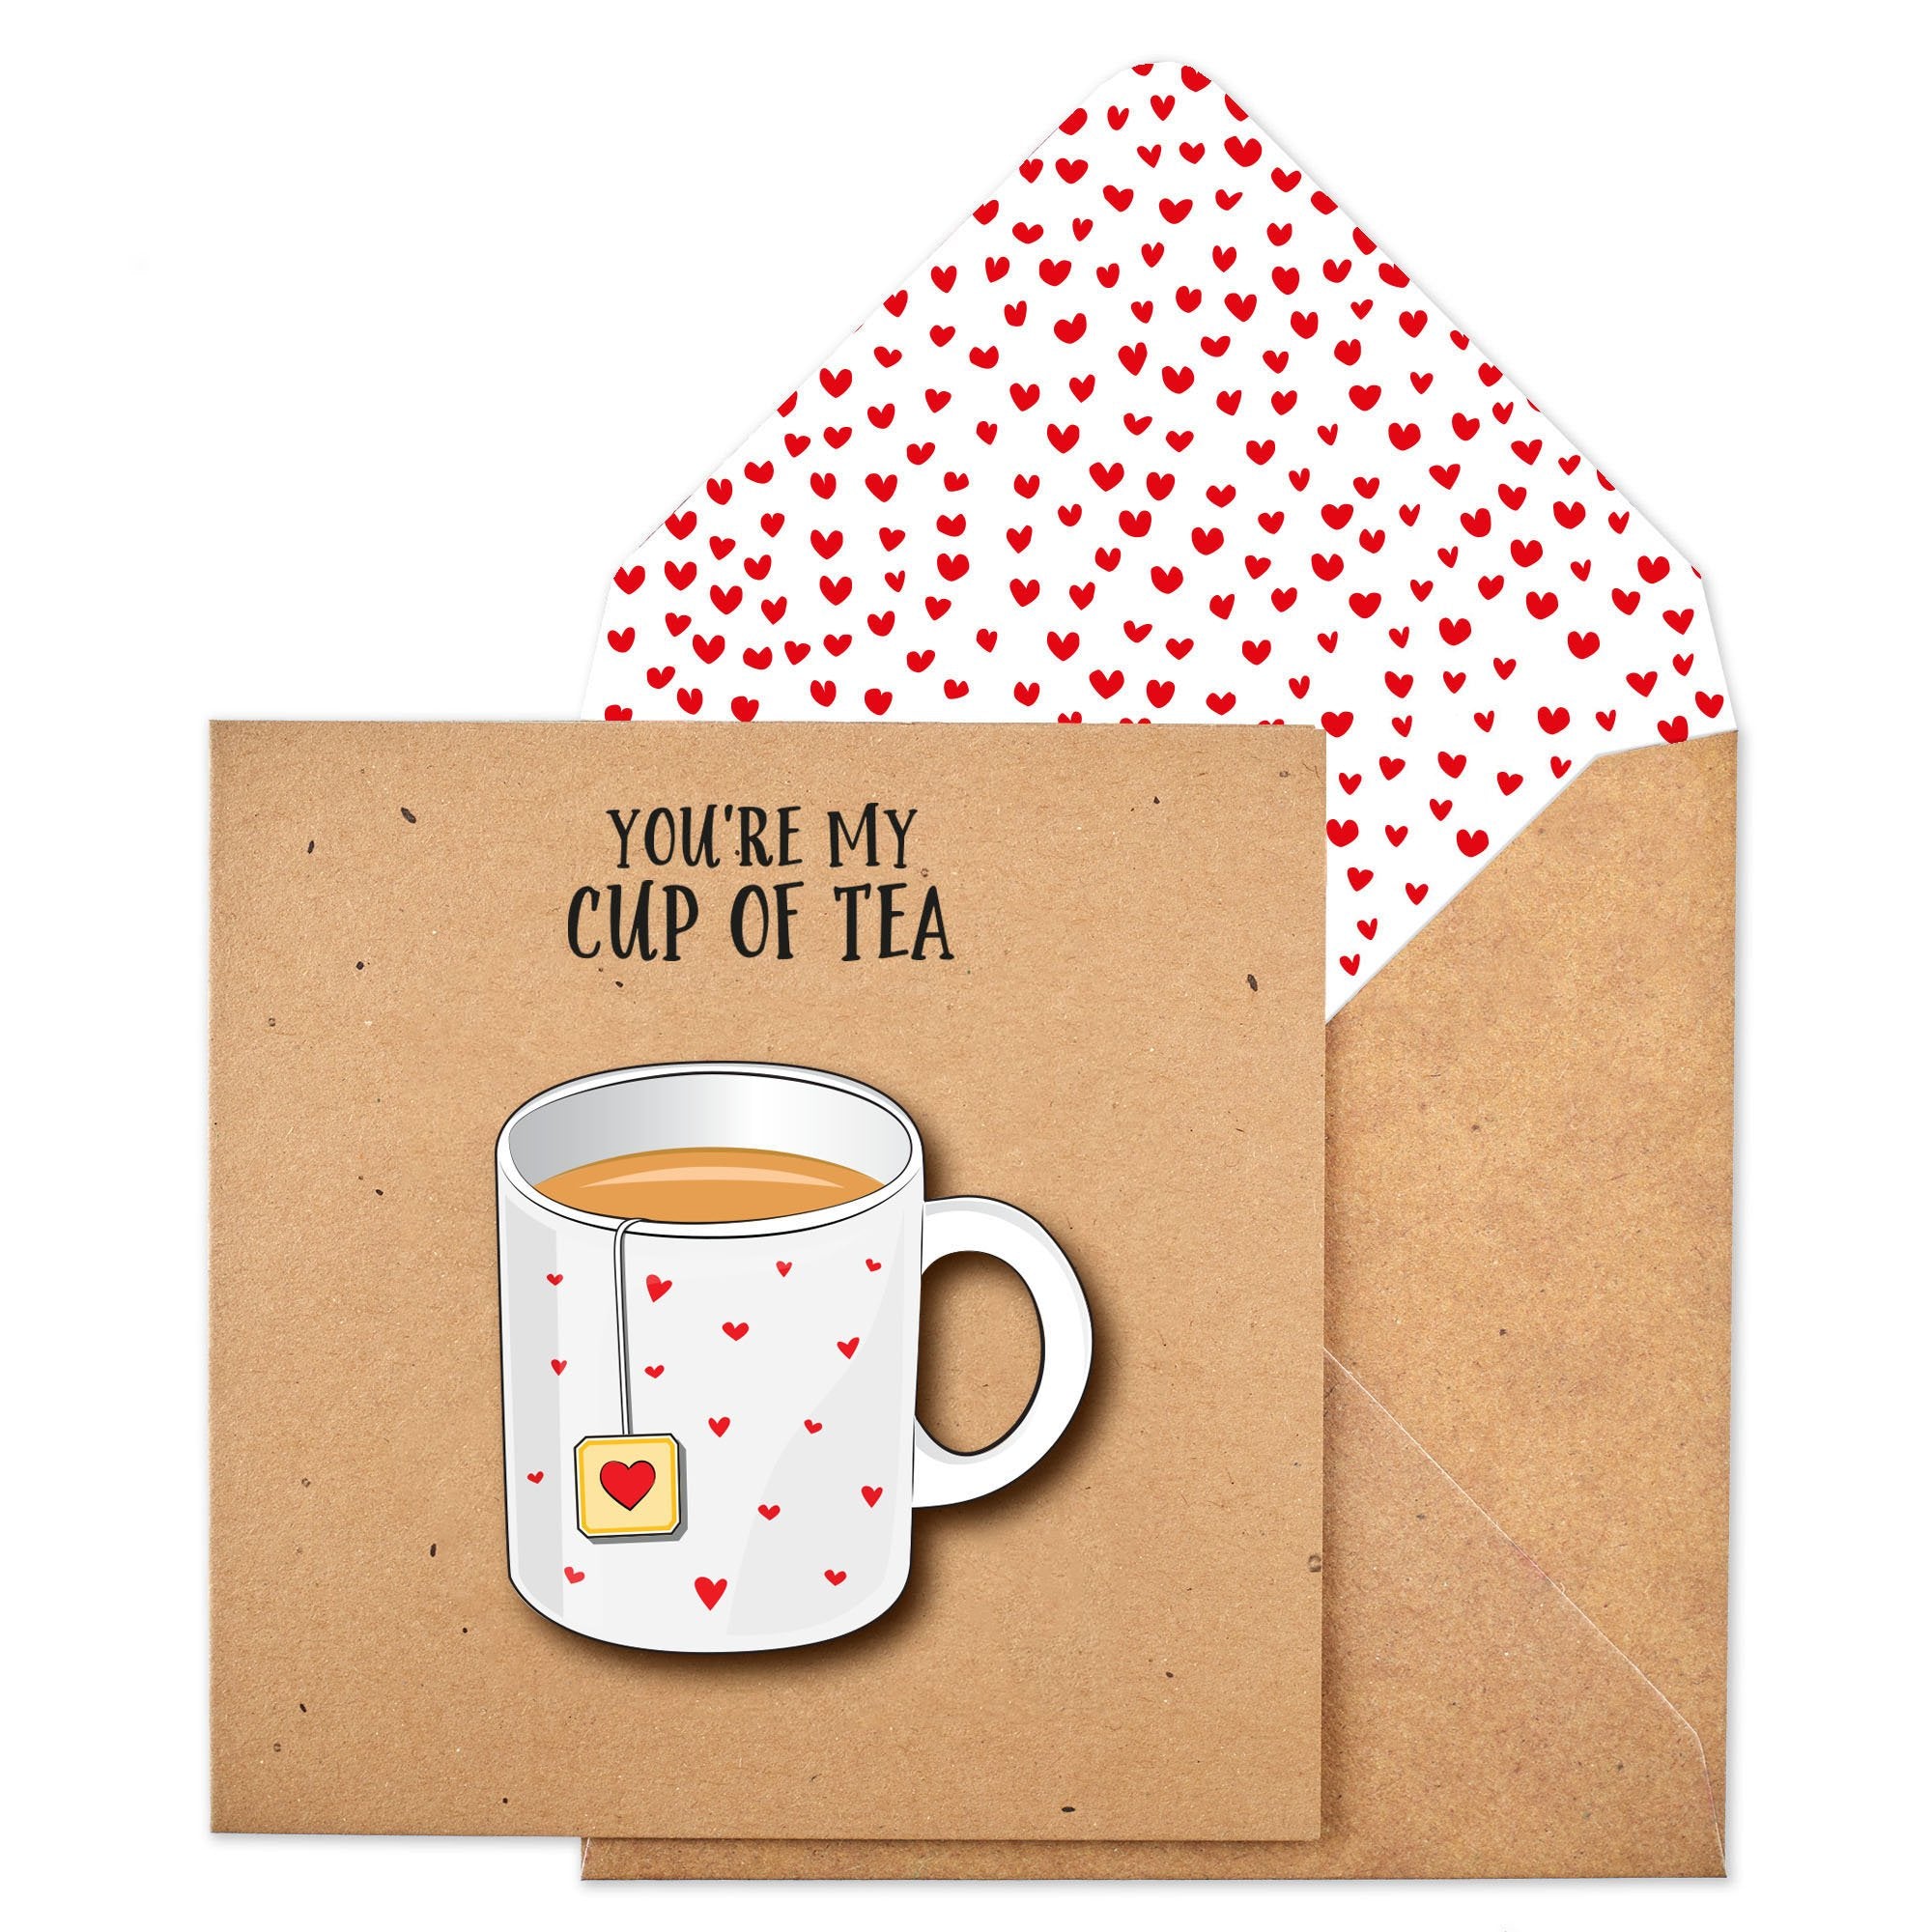 You're my cup of tea' - TACHE Trade